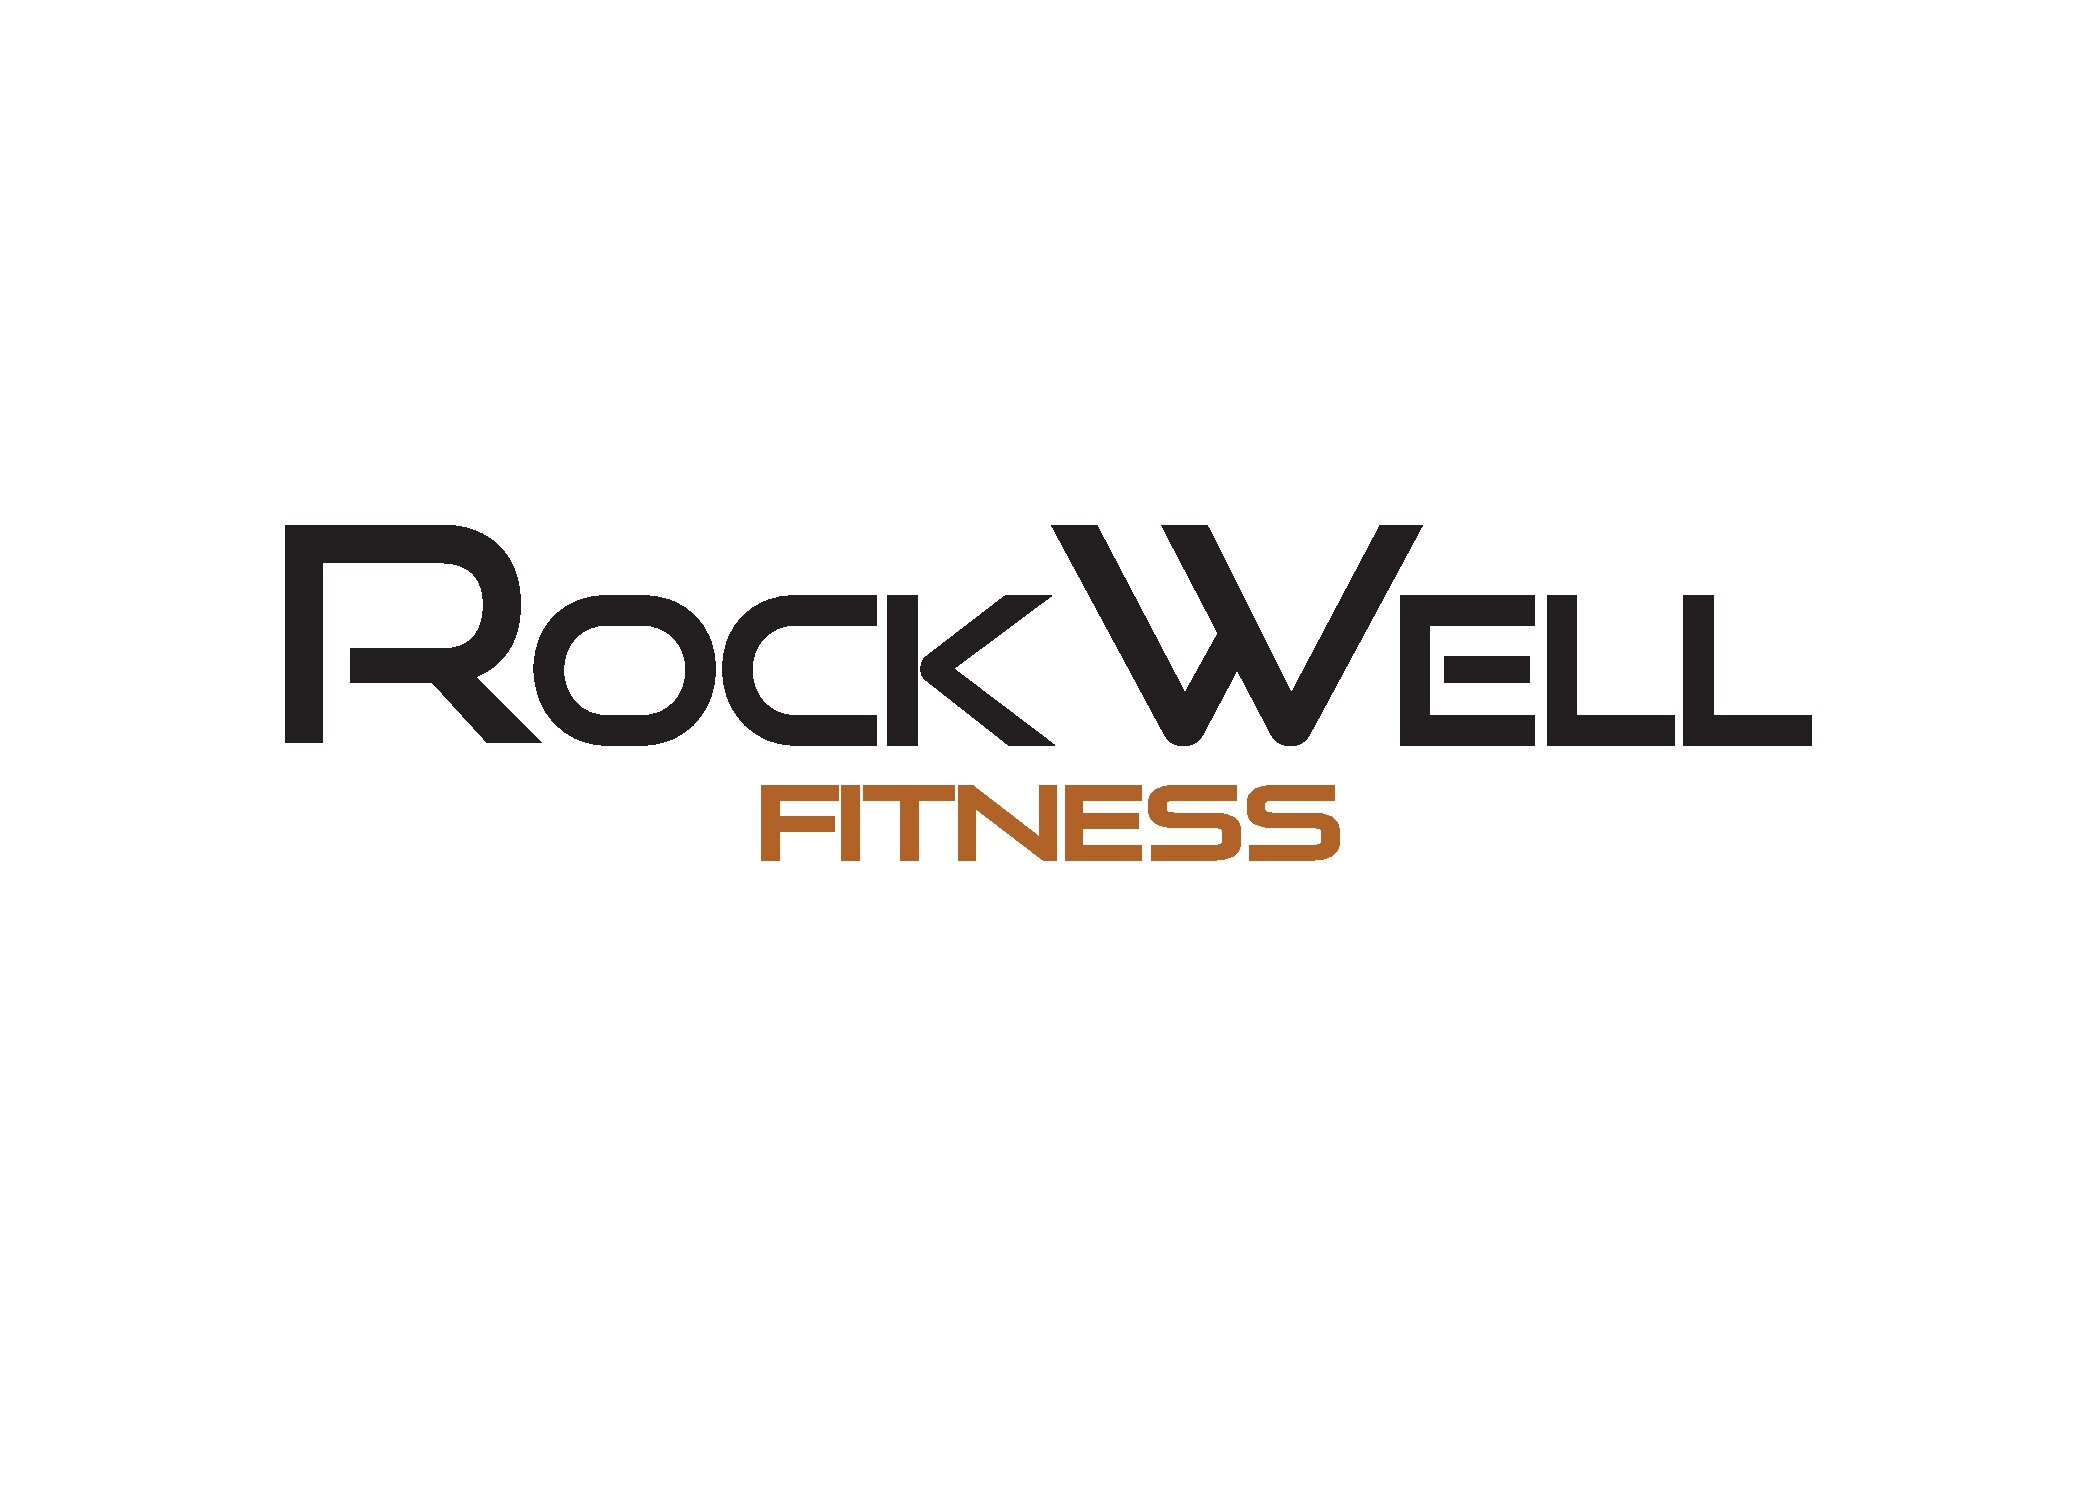 Rockwell Fitness